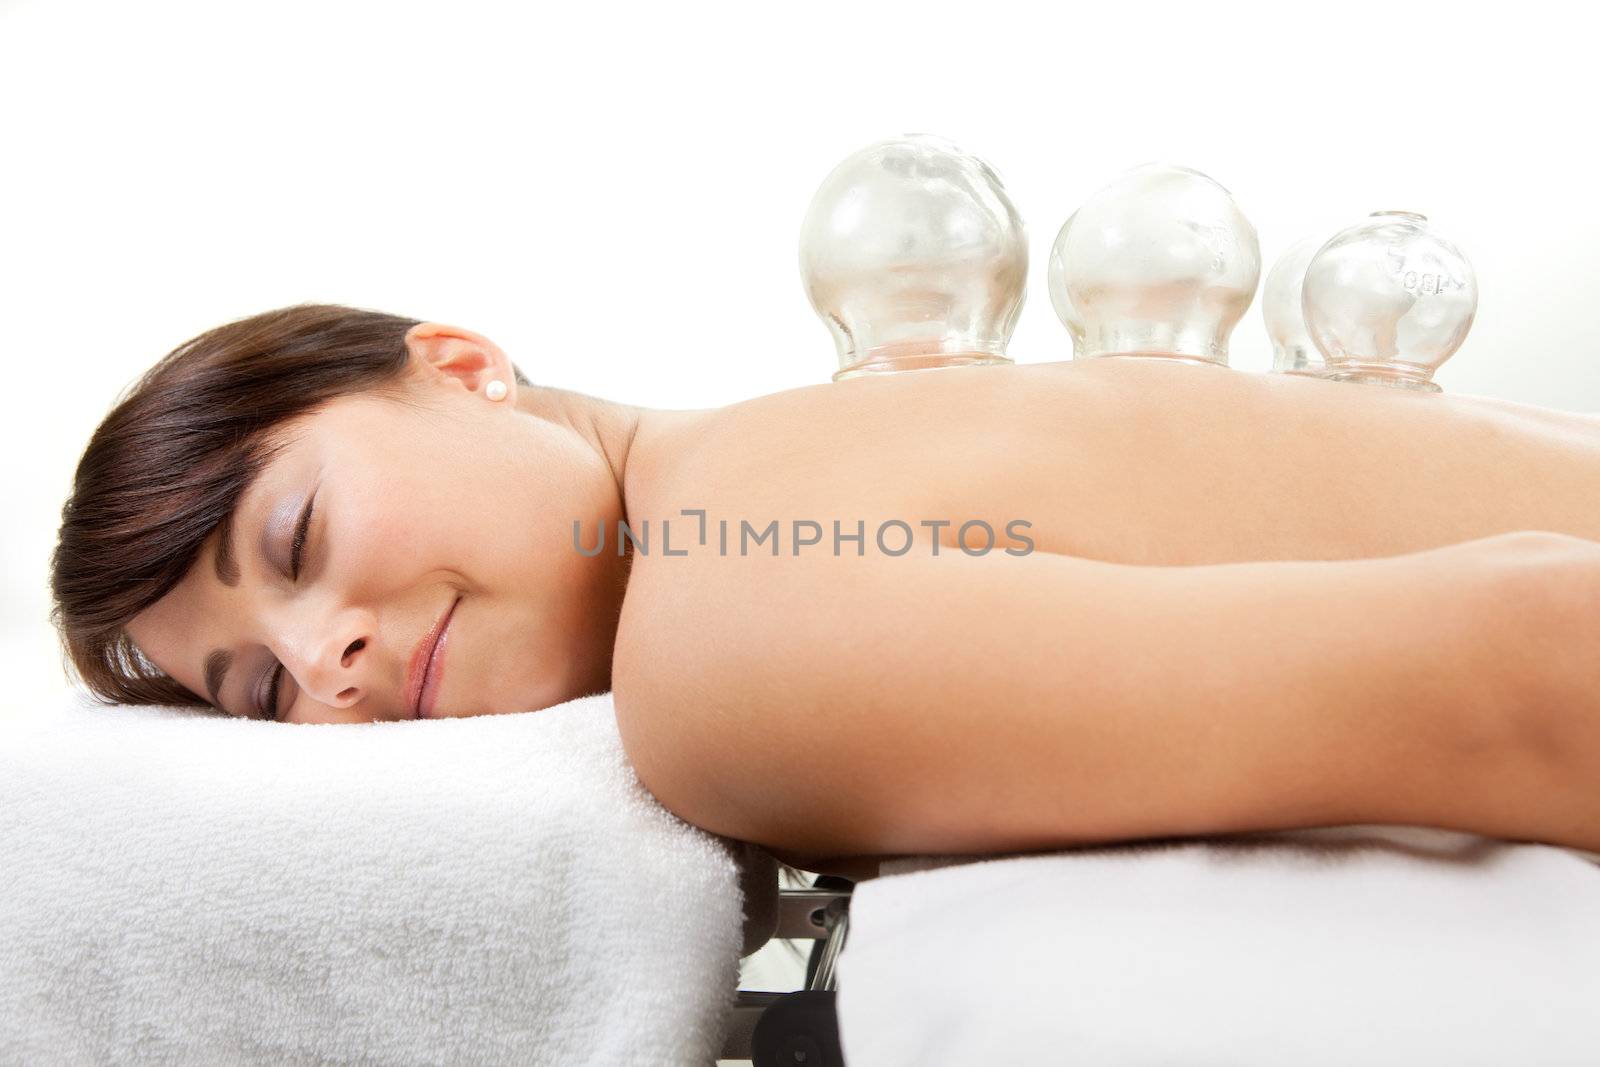 Female laying on chest with cupping treatment on back